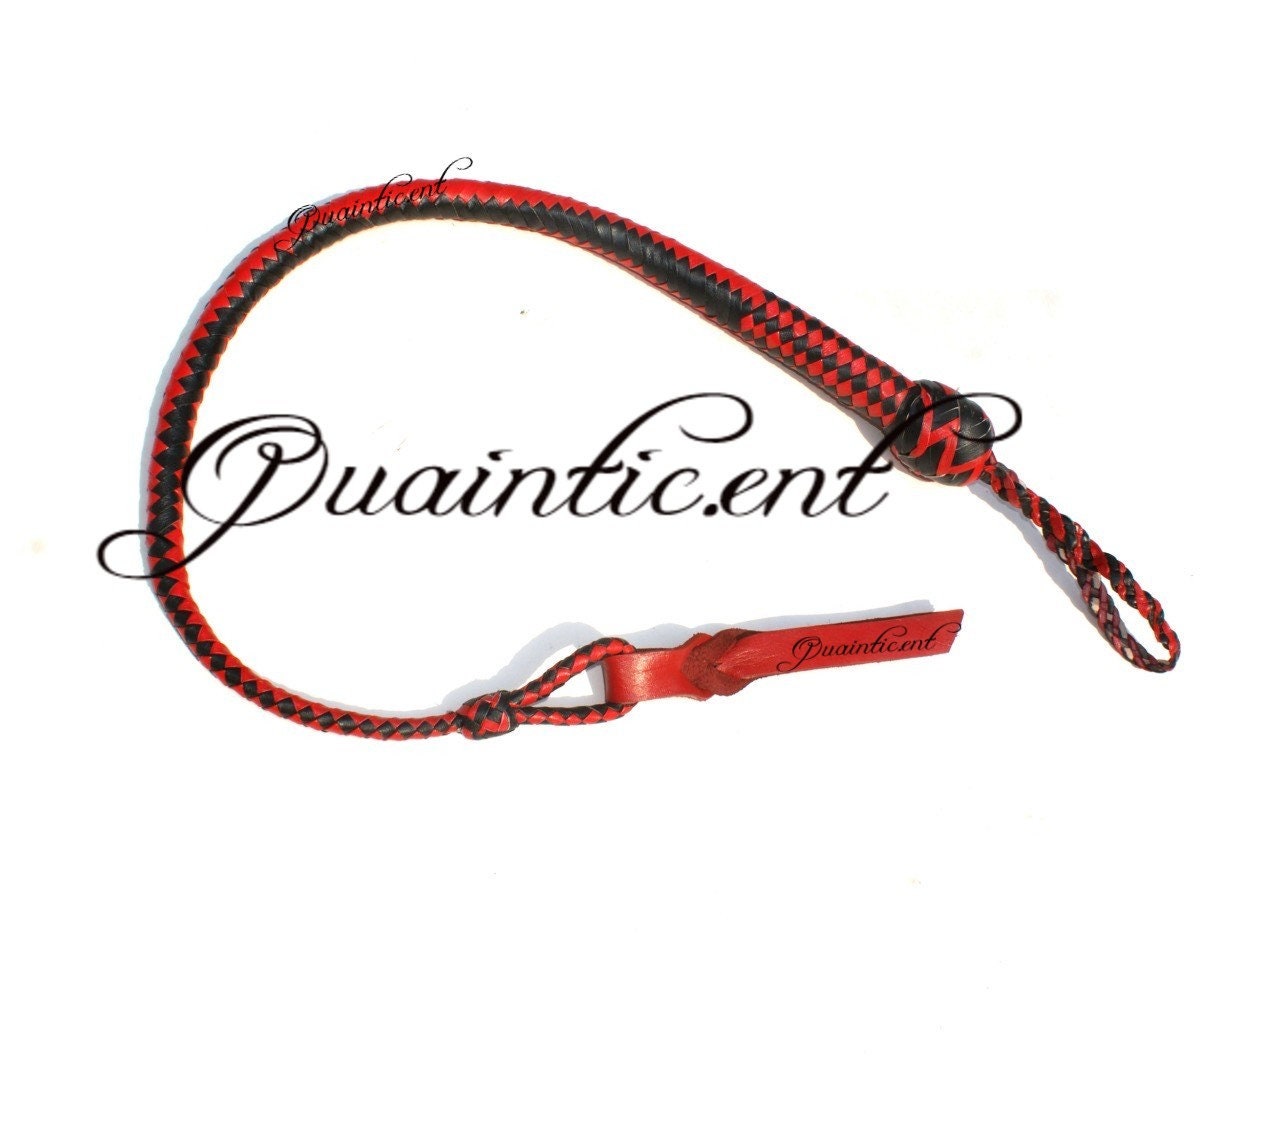 4 plait  BLACK and RED LEATHER QUIRT WHIP / CROP  / FANTASY WHIP 28" 